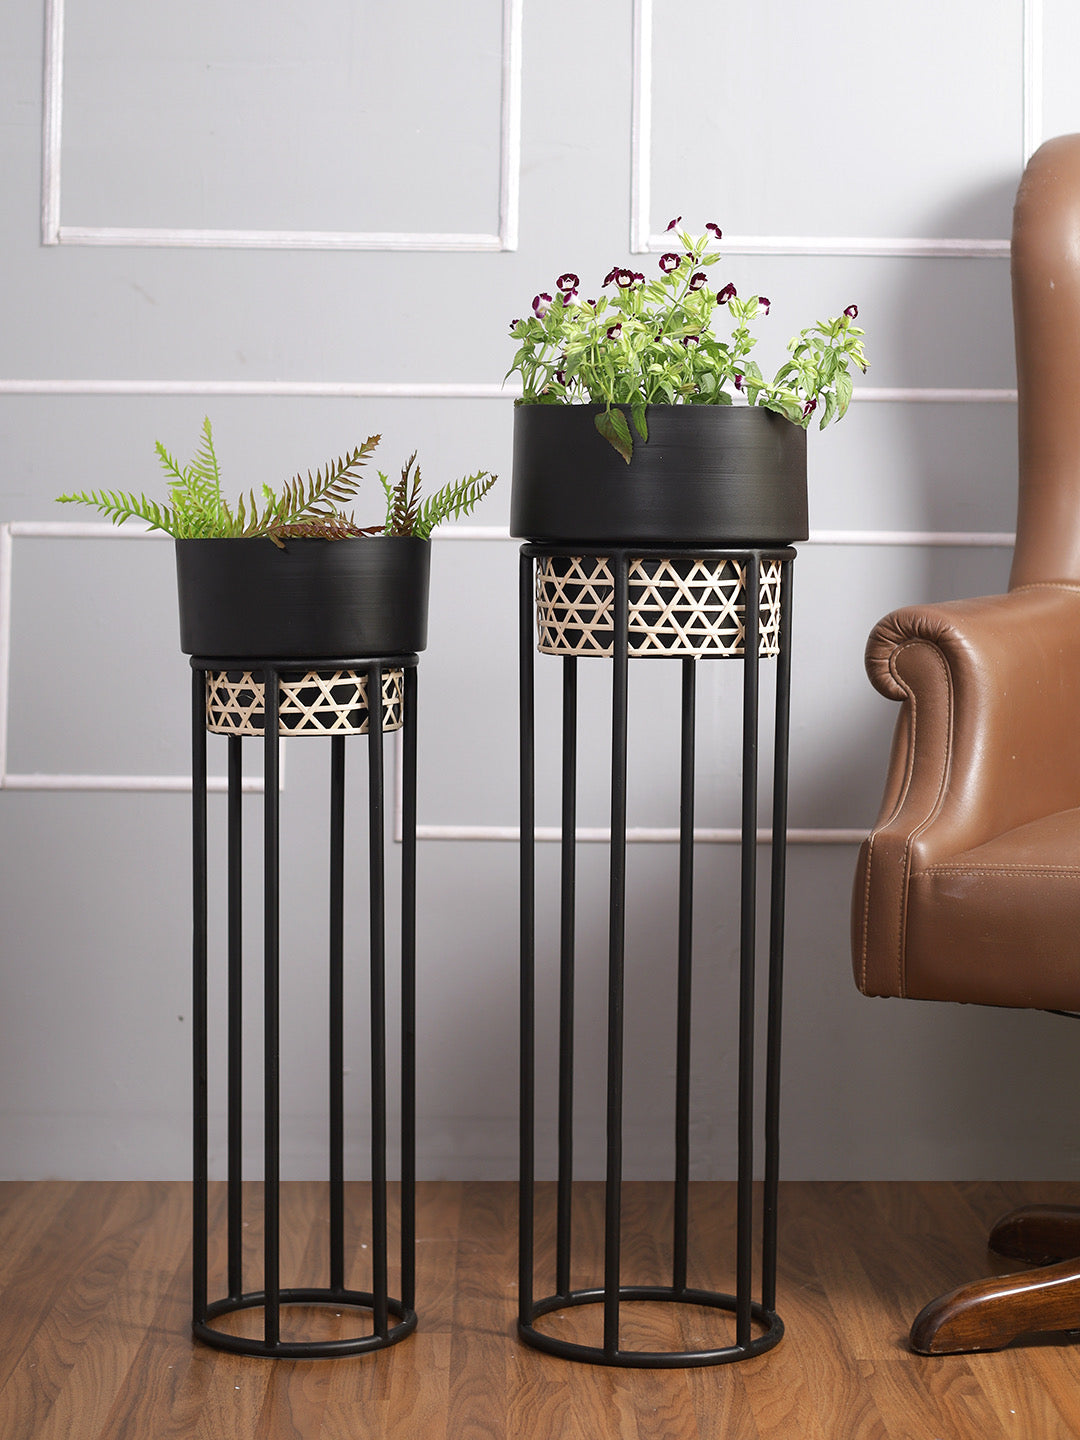 Set of 2 Black Planters with Stand - Default Title (CHM2206_2)